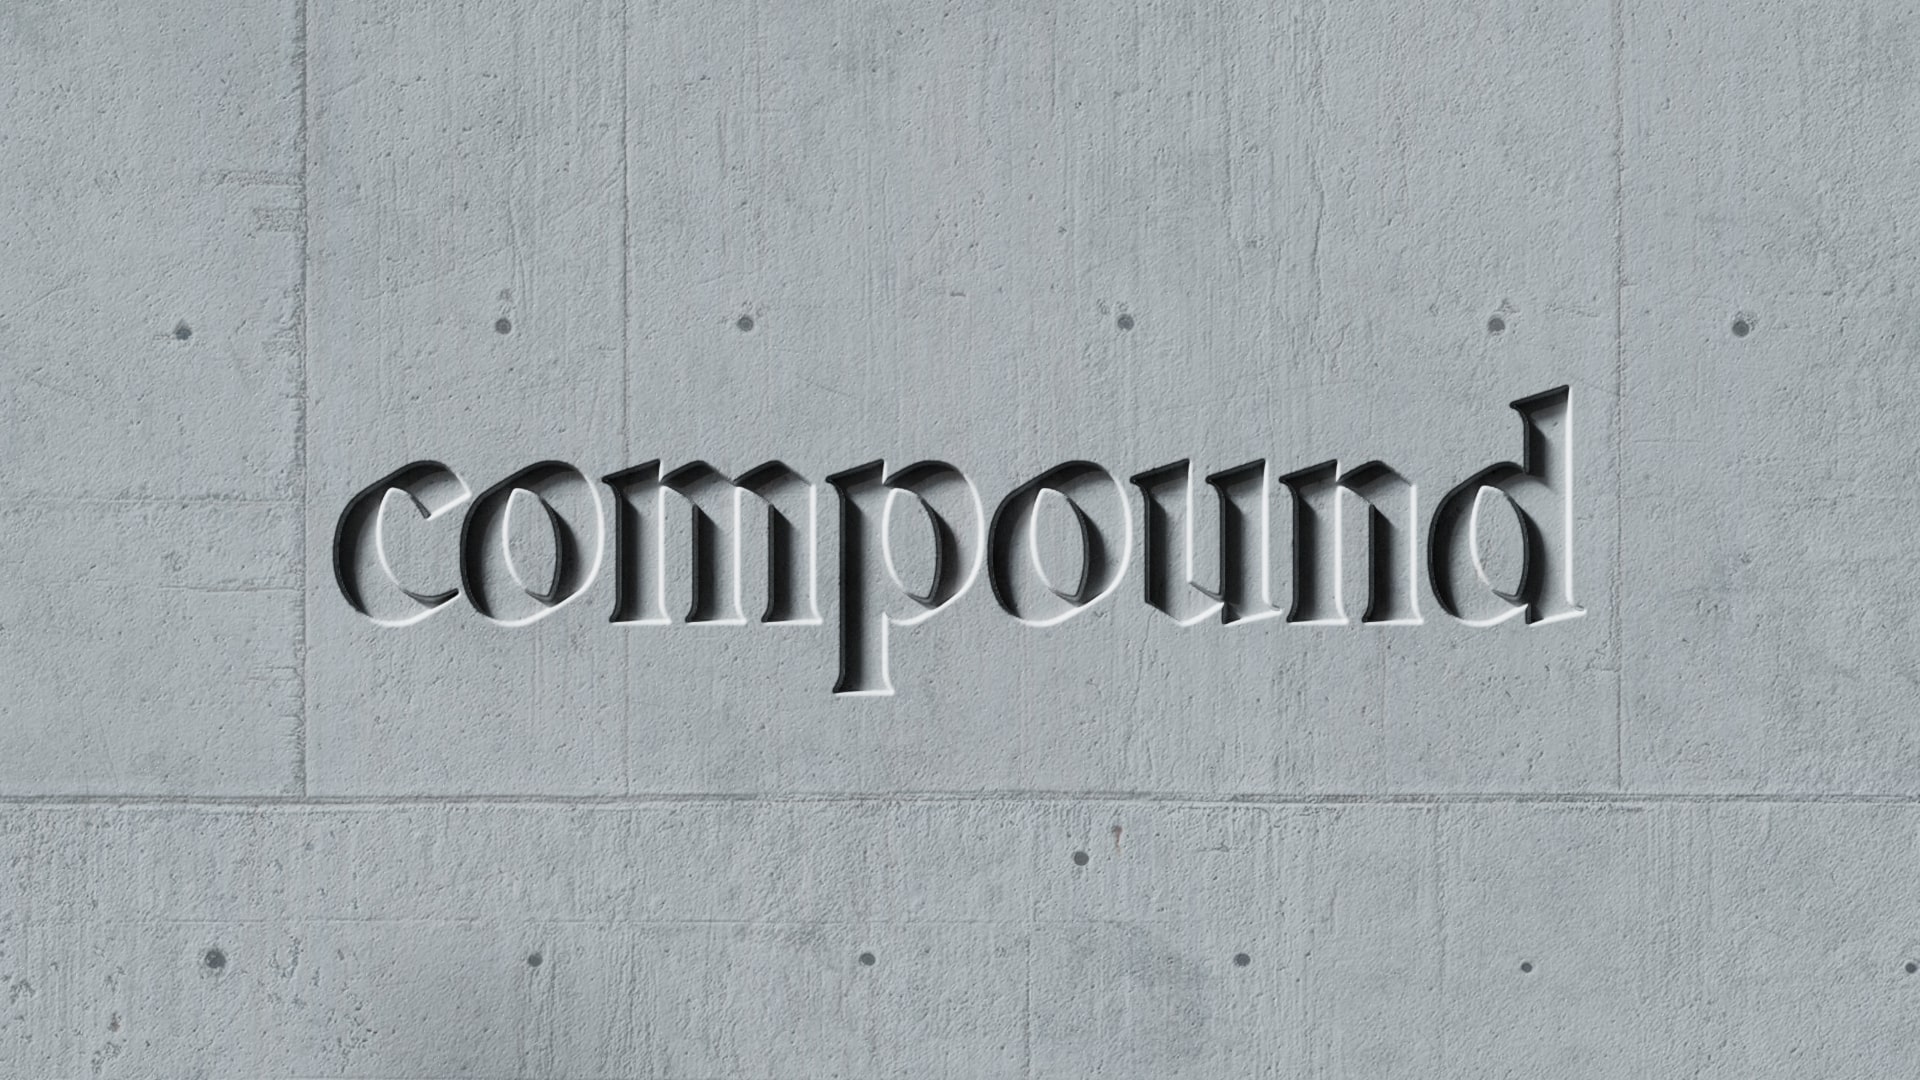 The word "compound" is chiseled into a smooth, gray concrete wall, creating a 3D effect with shadows and highlights that give the text depth. The background is slightly textured but uniform in color.